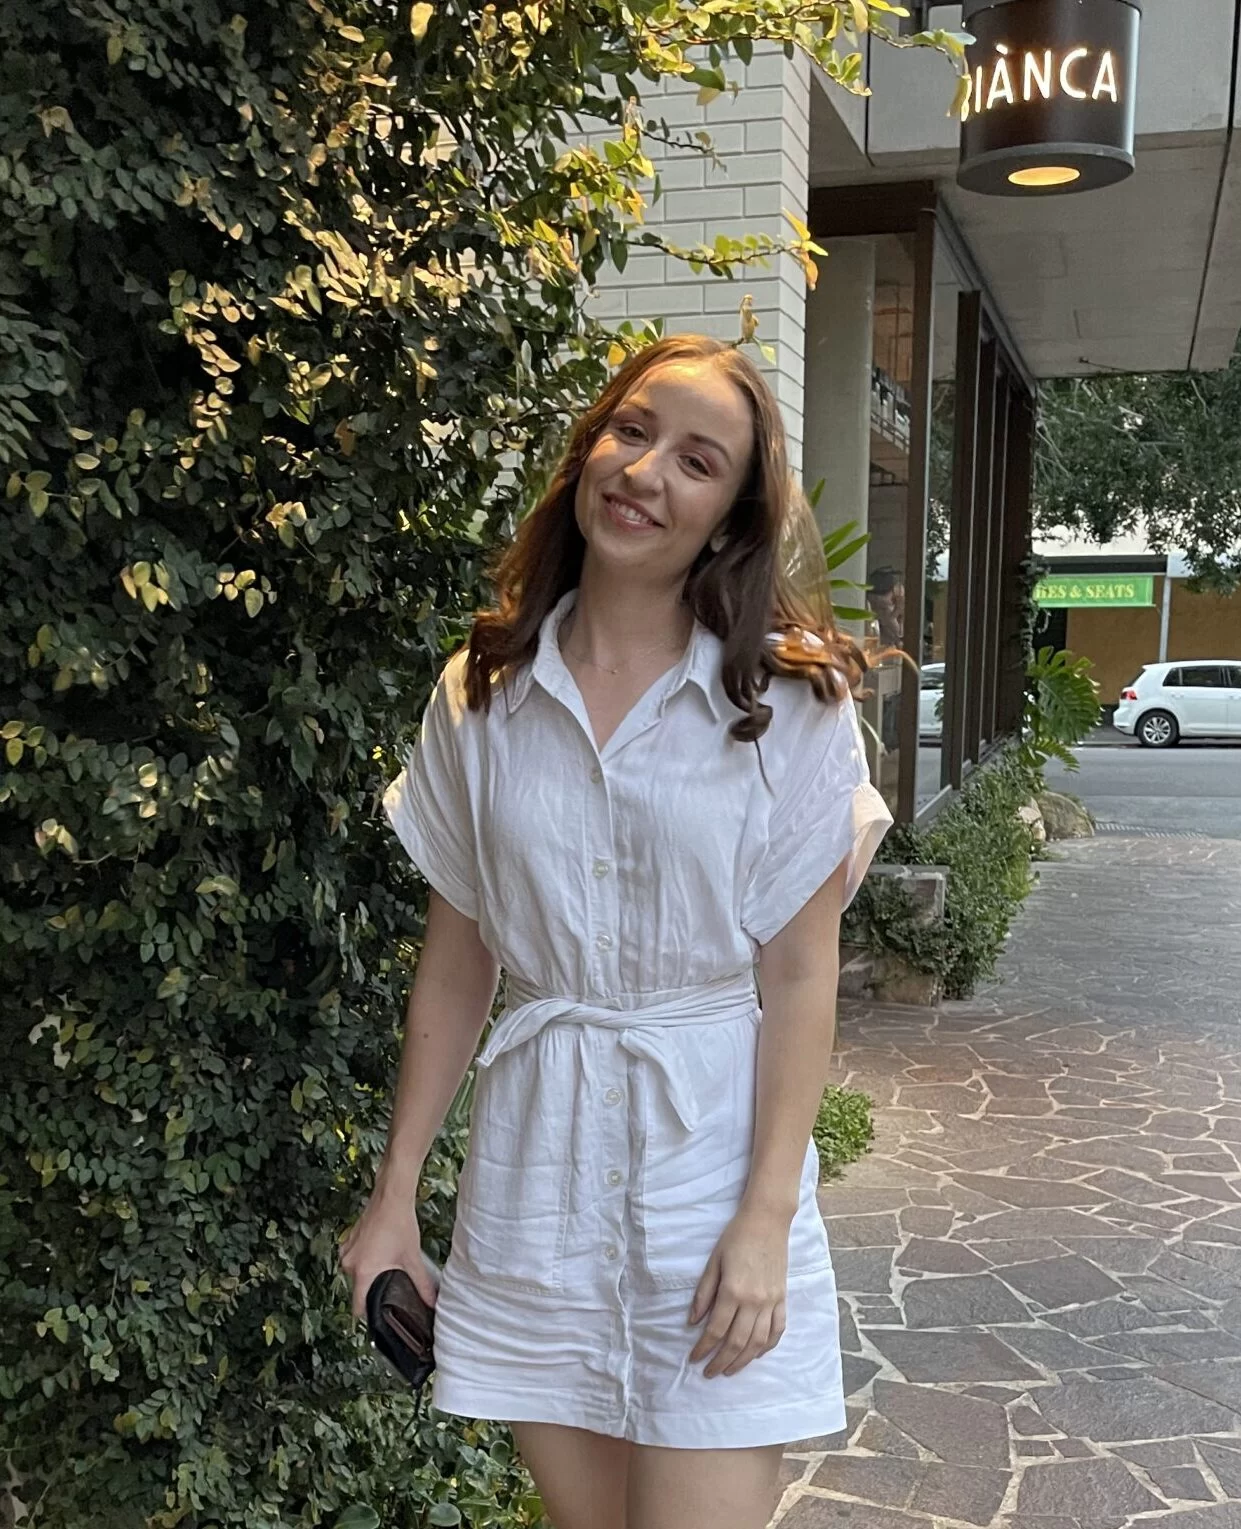 A girl in a white dress stands smiling in front of some bushes